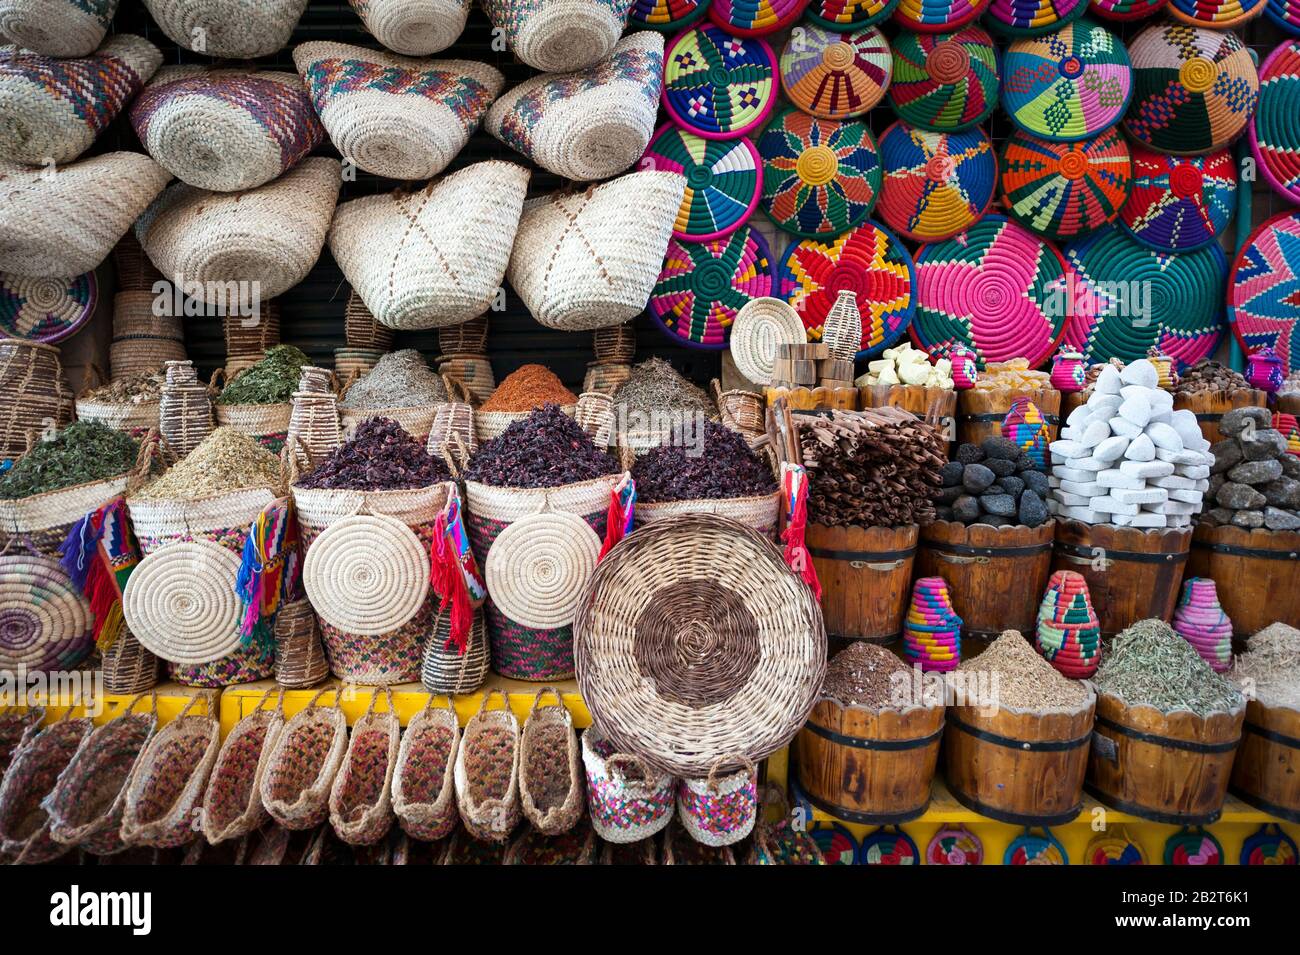 Colorful woven baskets and bags hang above mounds of spices and herbs in a market stall in the souk in Aswan, Egypt Stock Photo